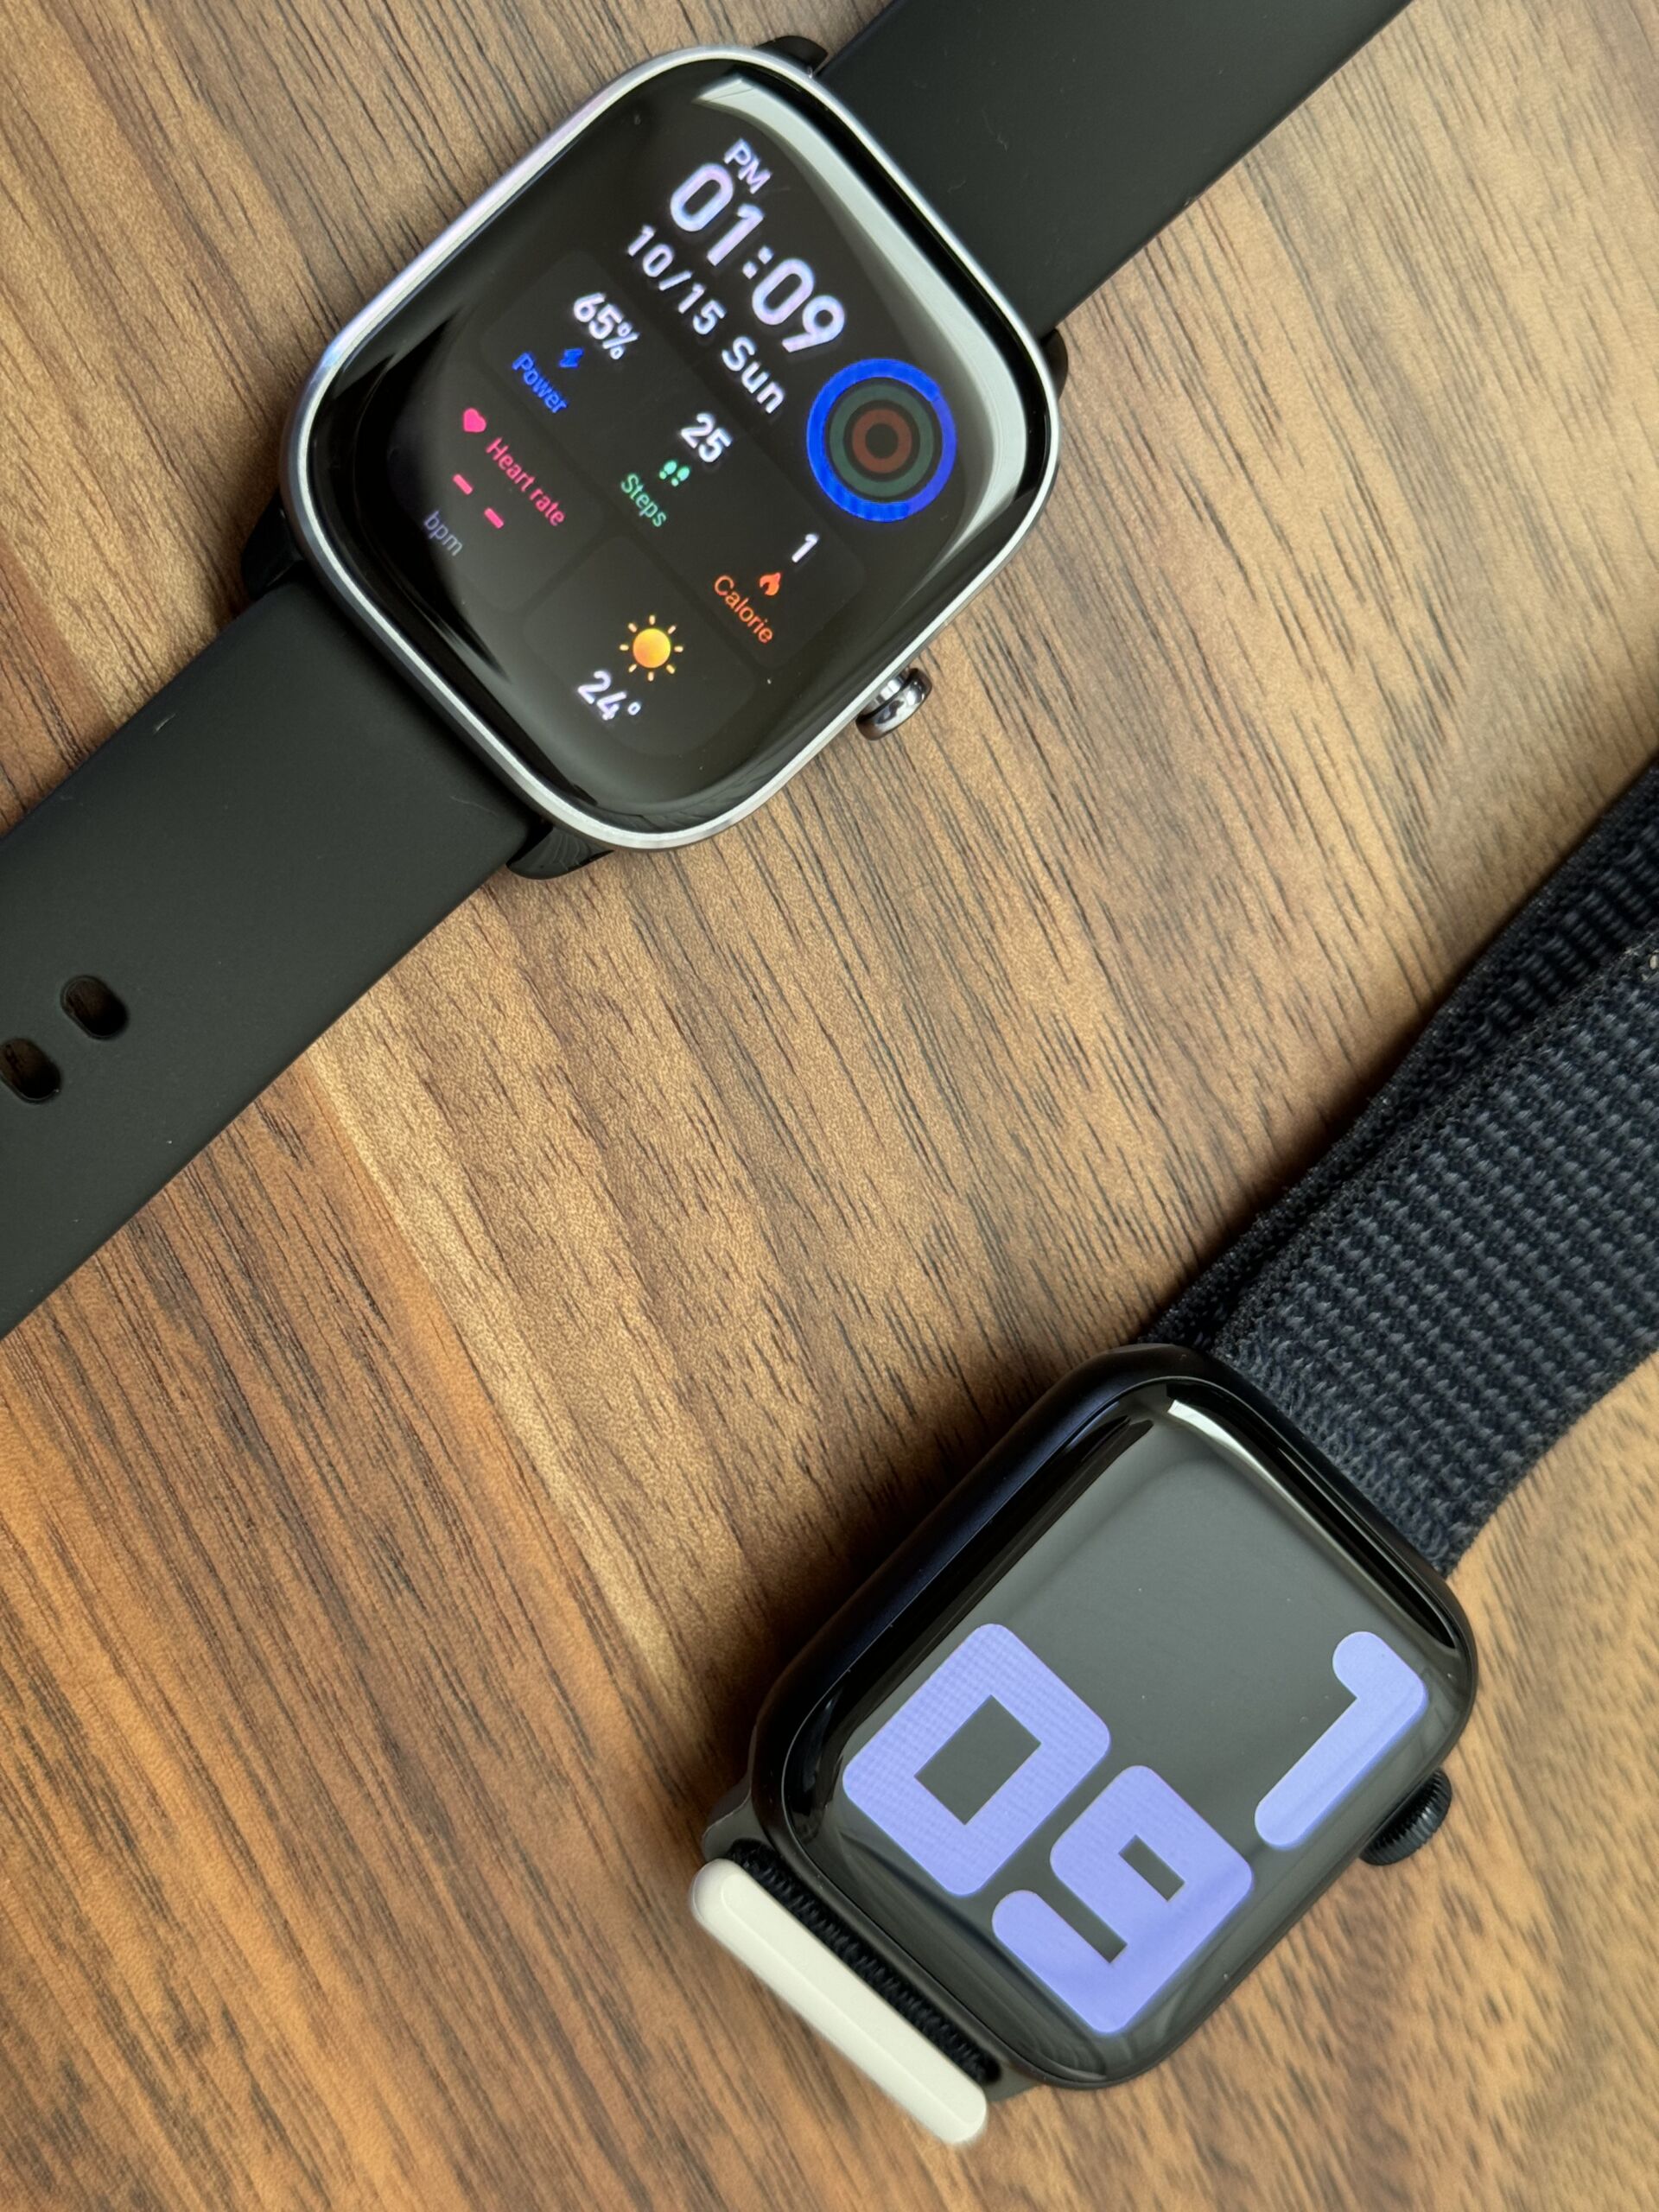 Amazfit GTS 2 Mini review: The best fitness smartwatch under $100